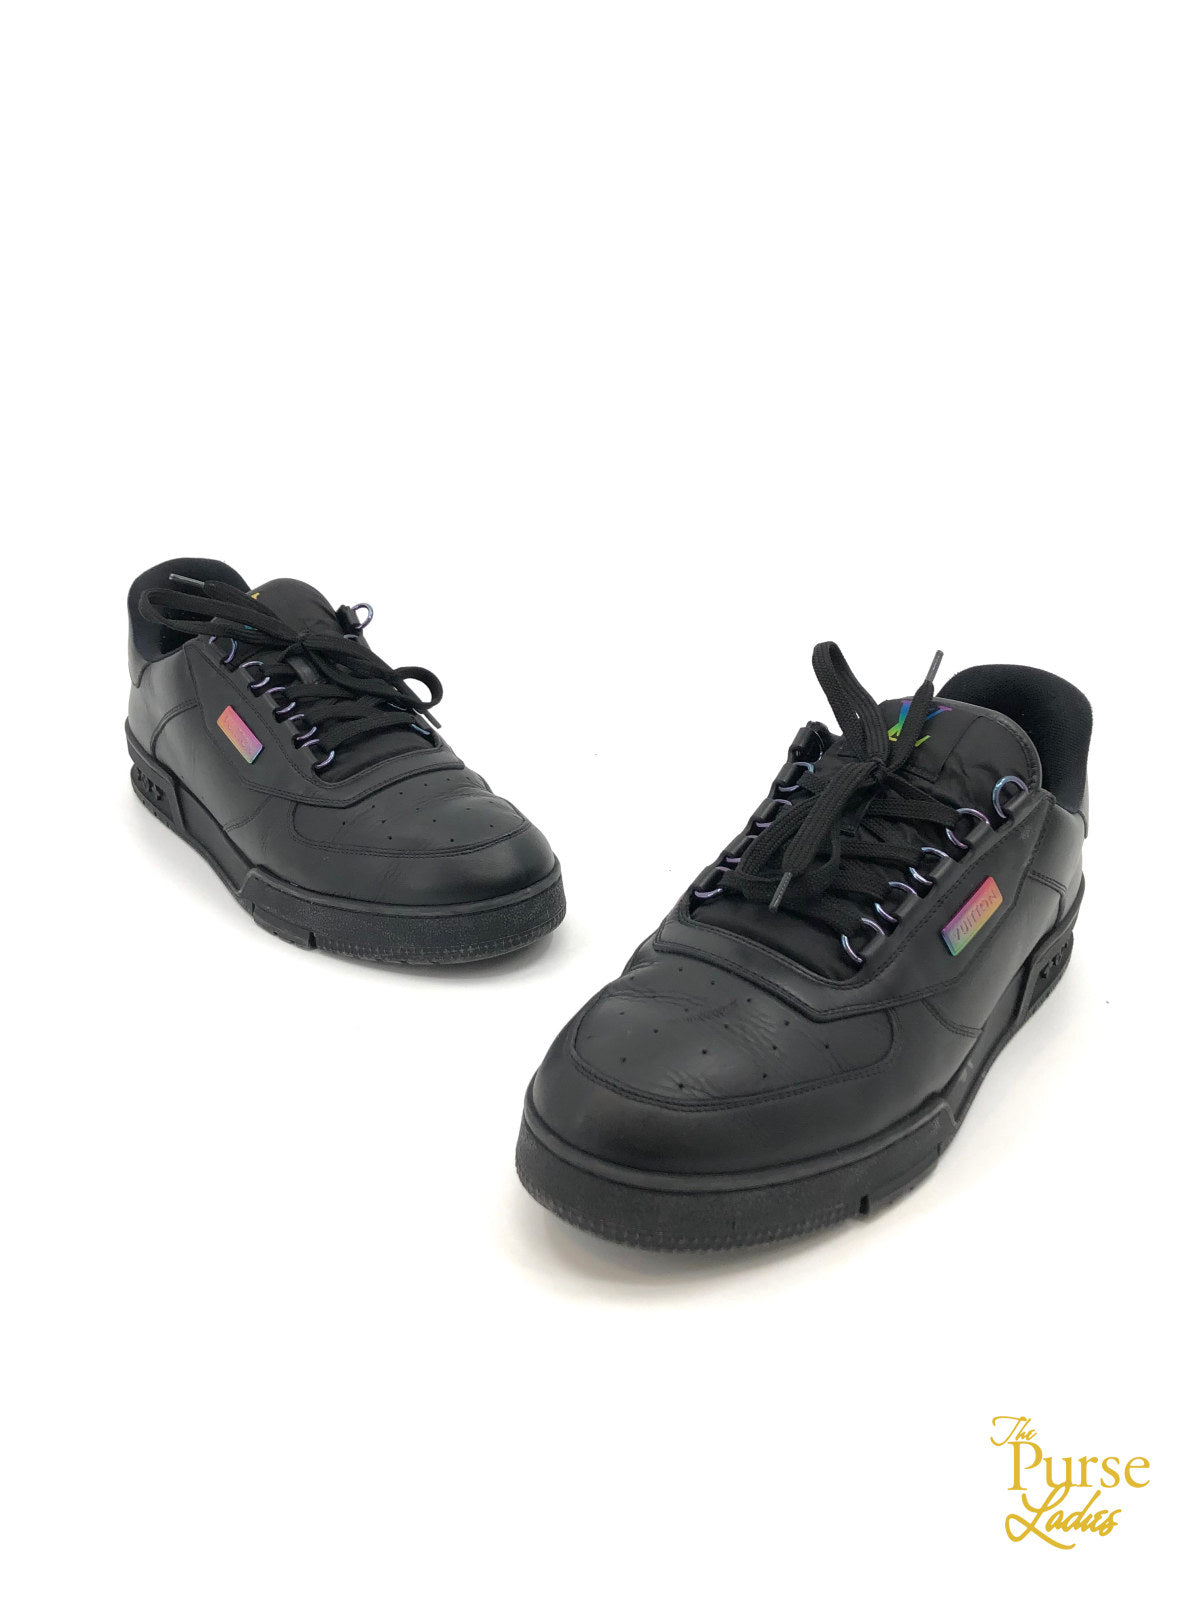 Leather trainers Louis Vuitton Black size 10 US in Leather - 27479396